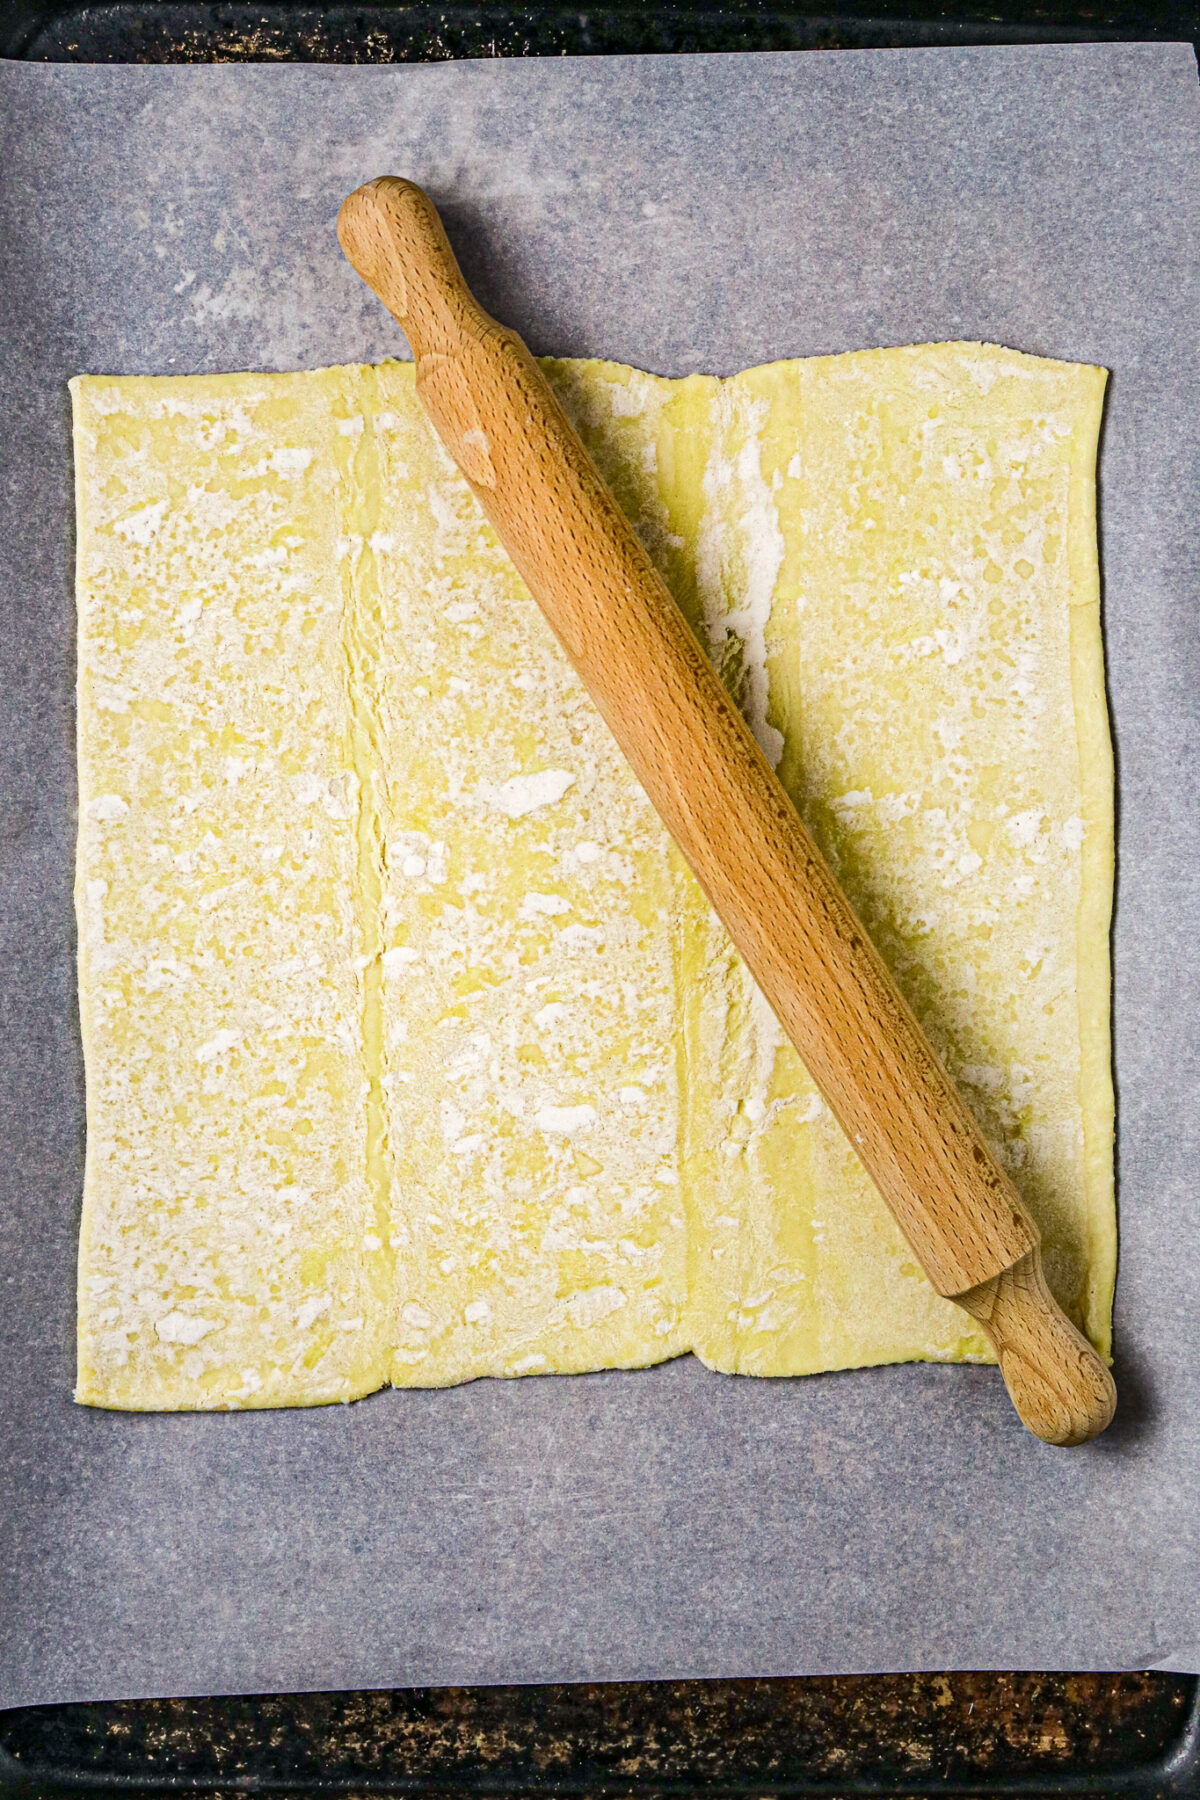 A wooden rolling pin in the middle of a square of puff pastry.